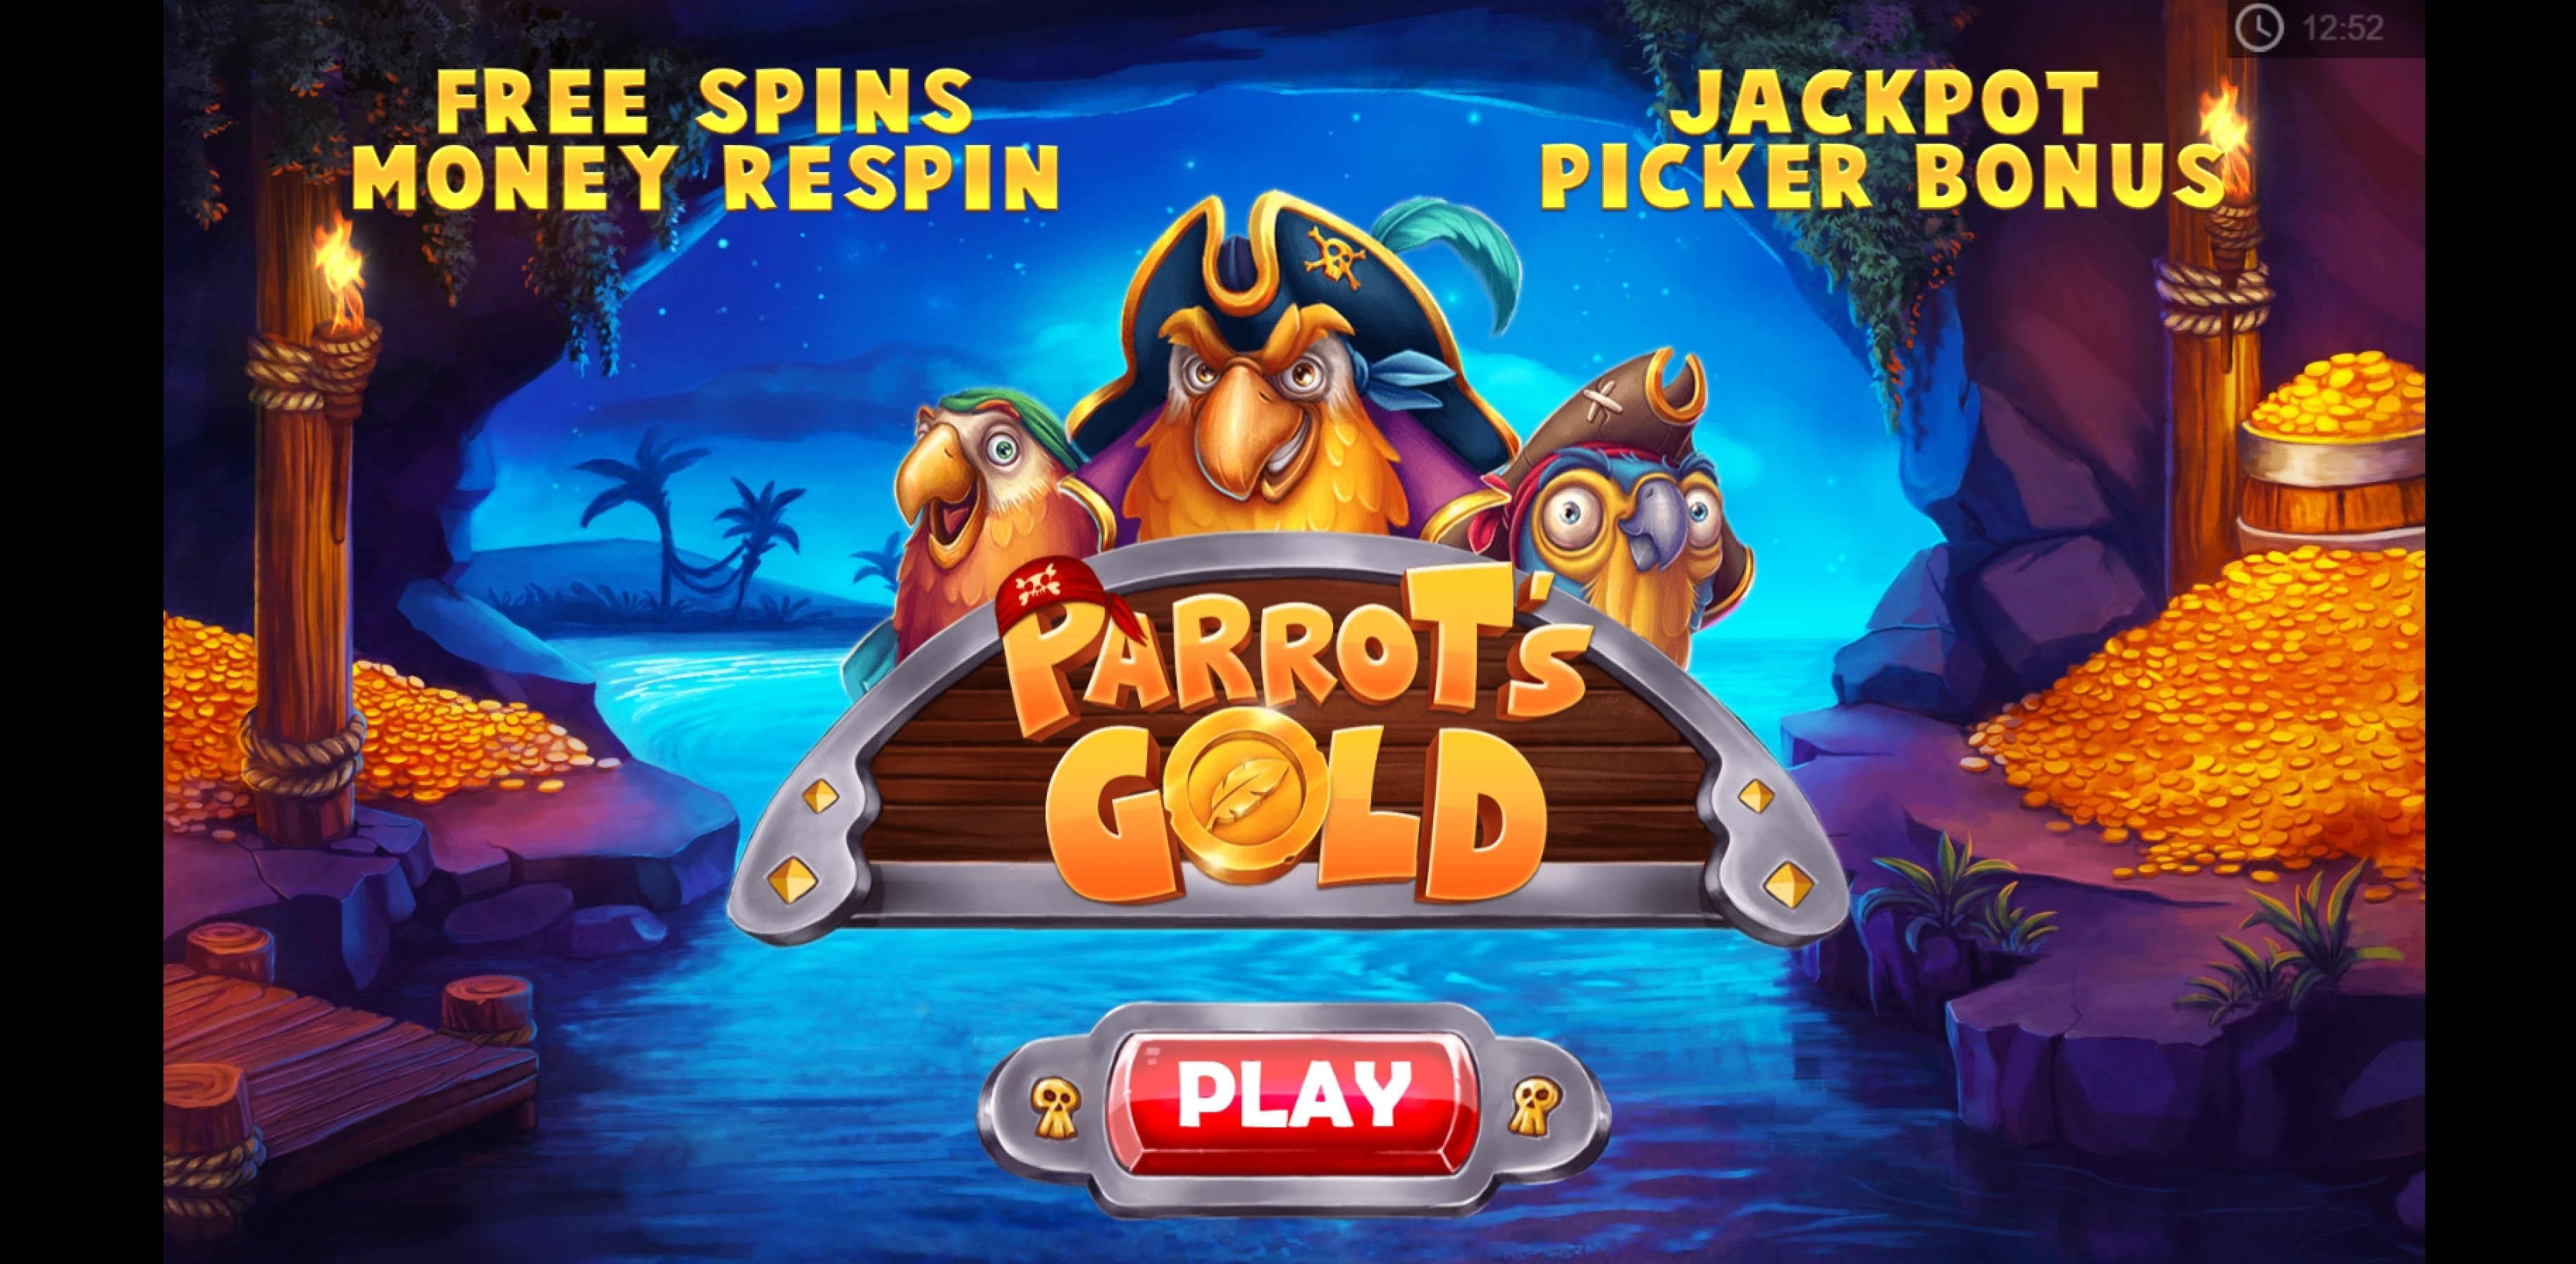 Play Parrot's Gold Free Casino Slot Game by PariPlay